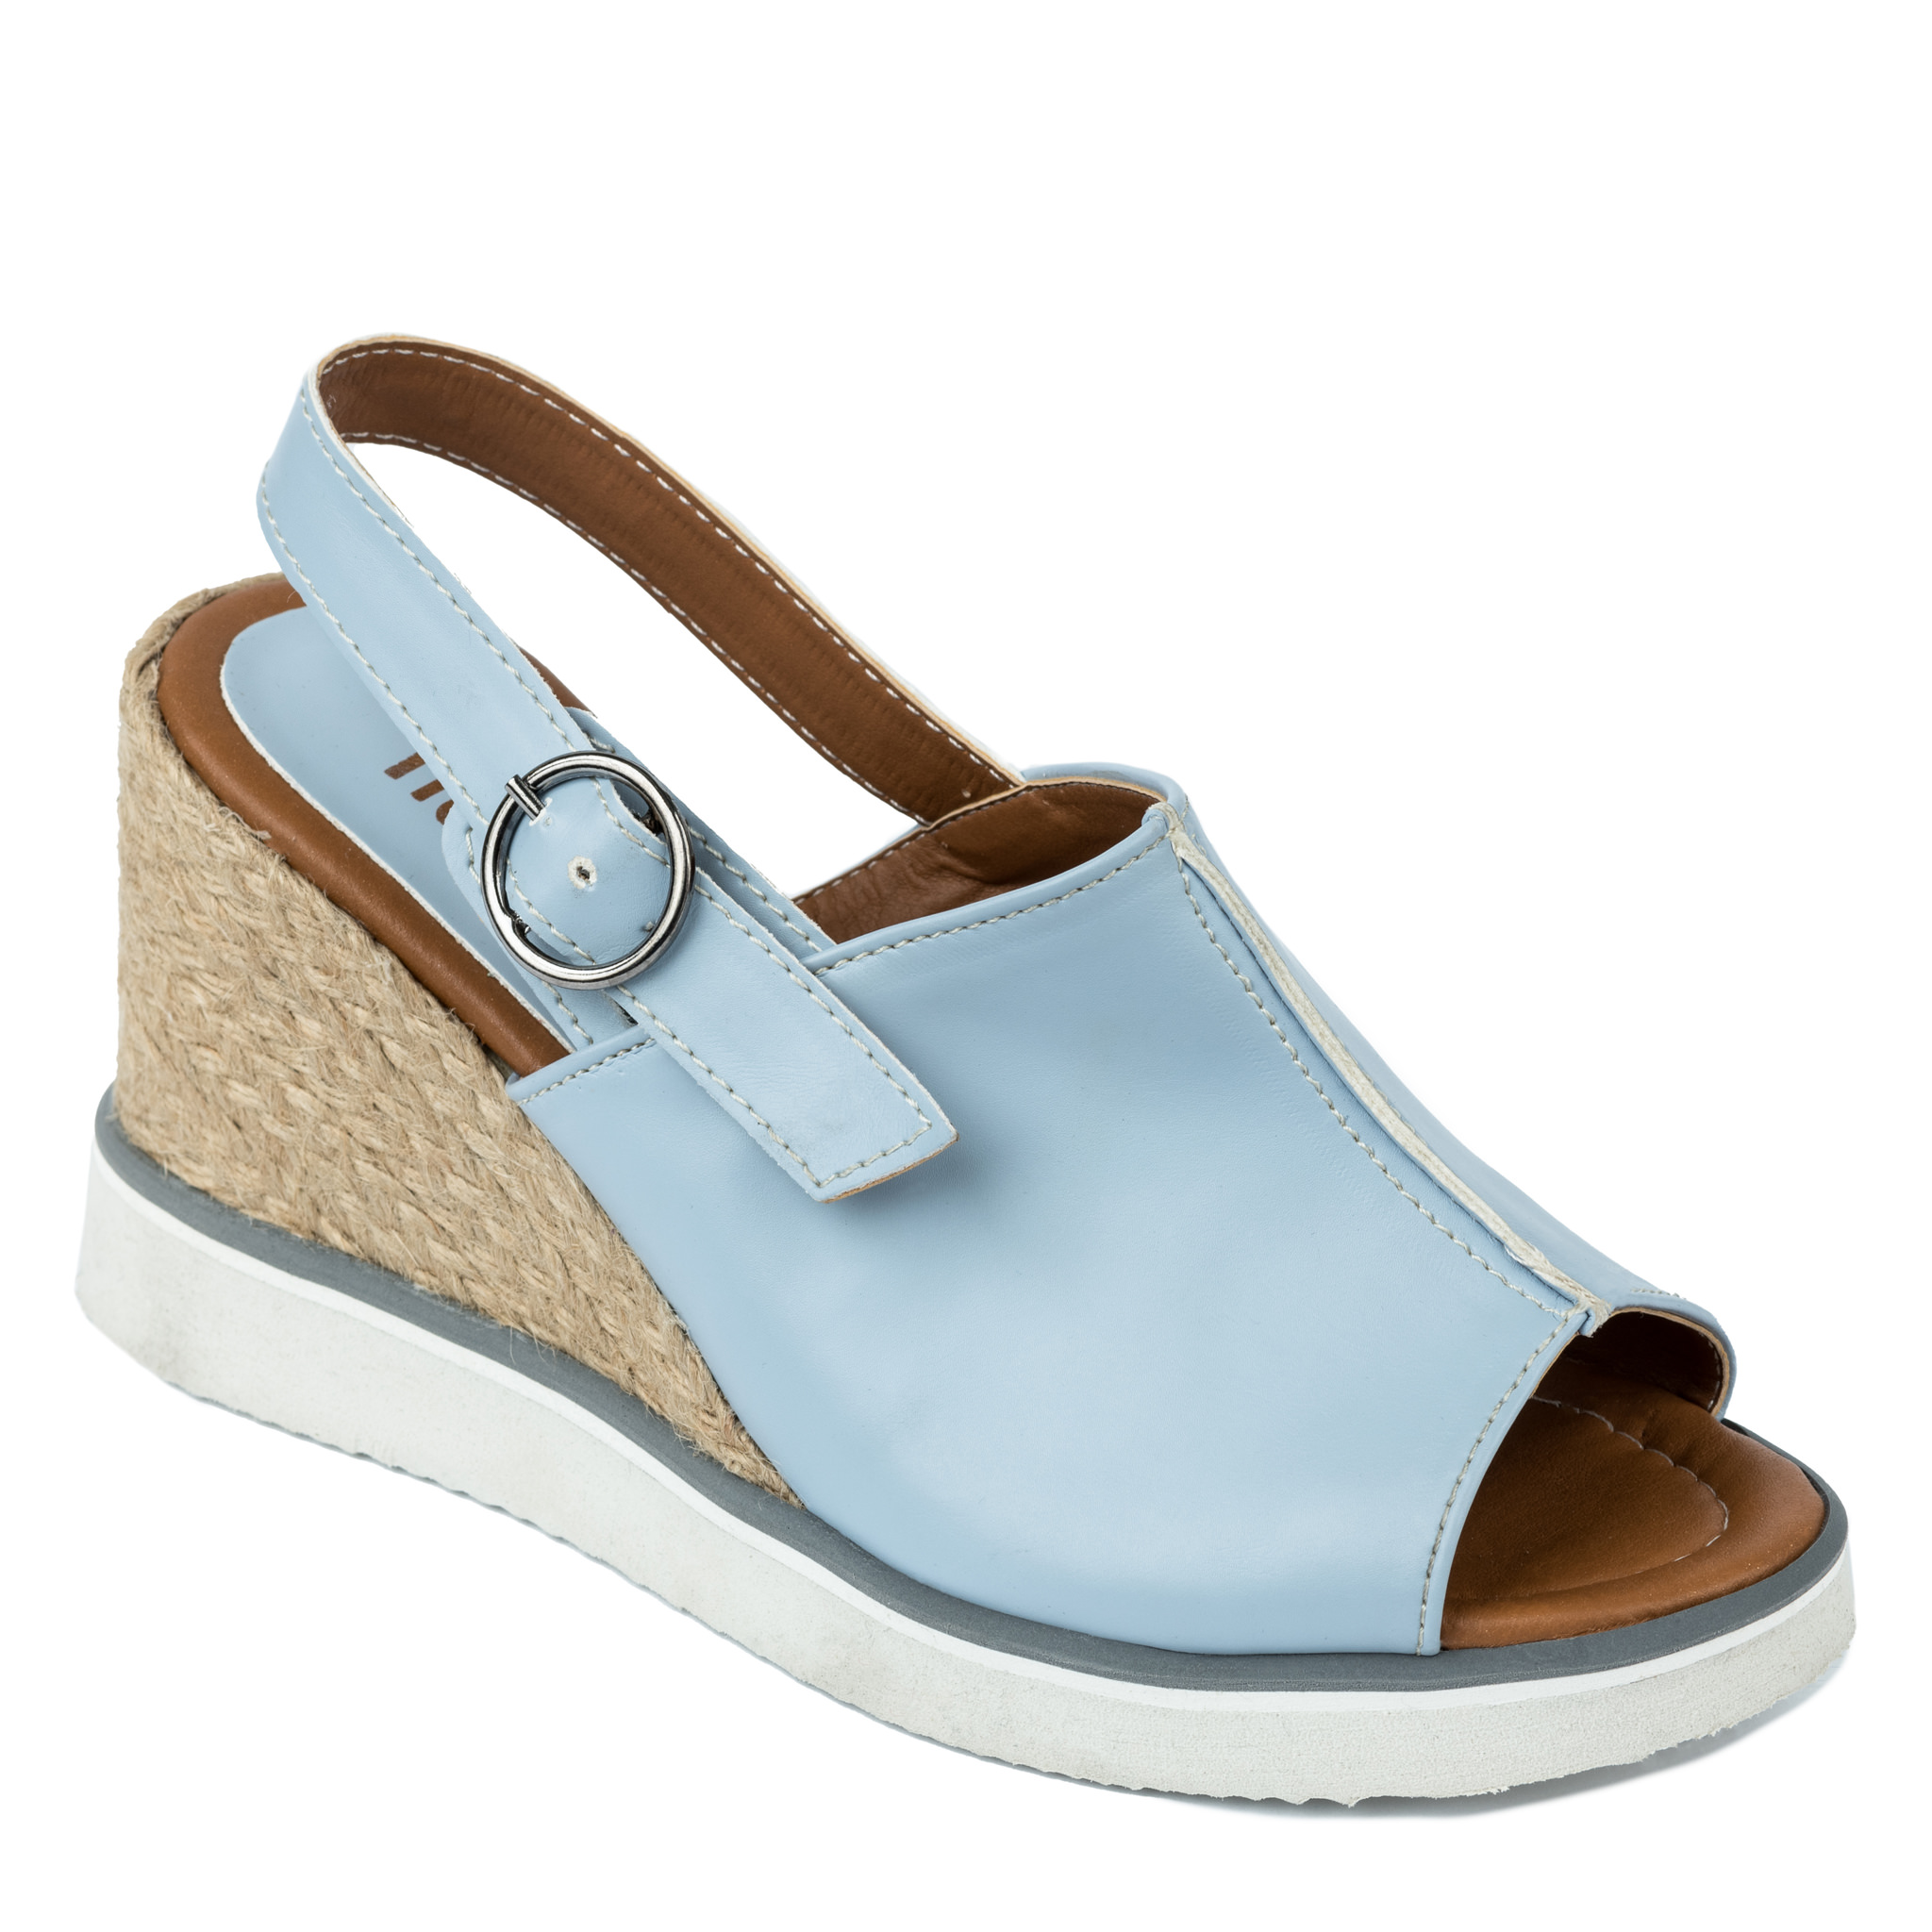 WEDGE SANDALS WITH JUTA AND SAW - BLUE